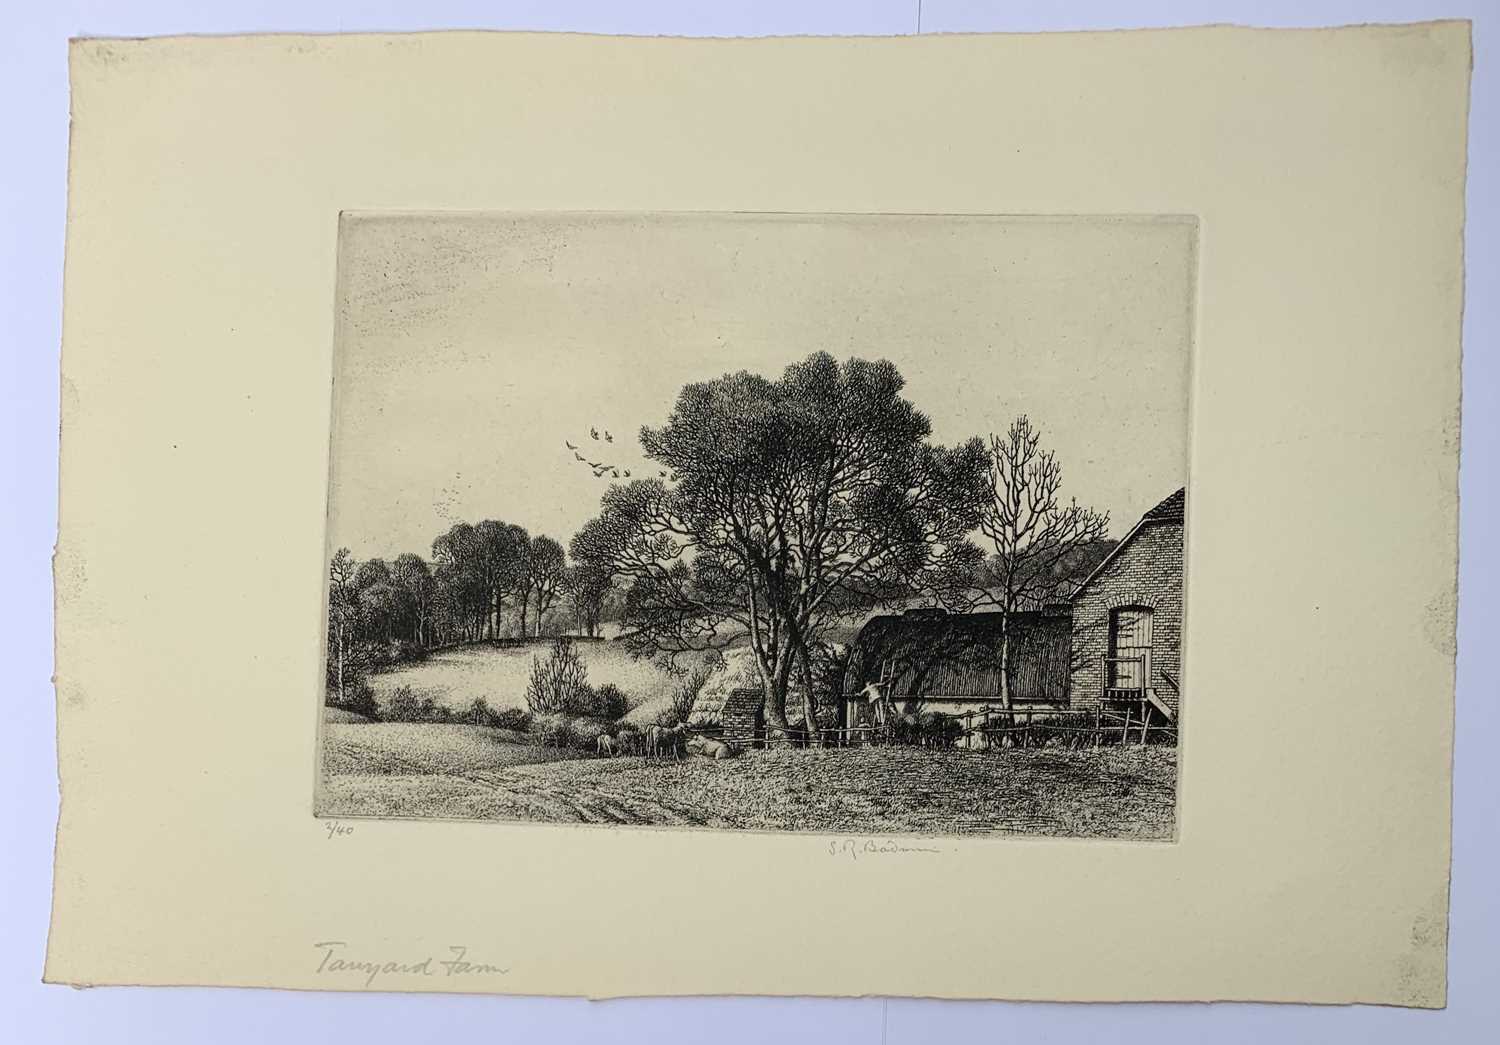 Stanley Roy BADMIN (1906-1989) Tanyard FarmCirca 1929Etching, 2/40 on Creswick paperSigned, numbered